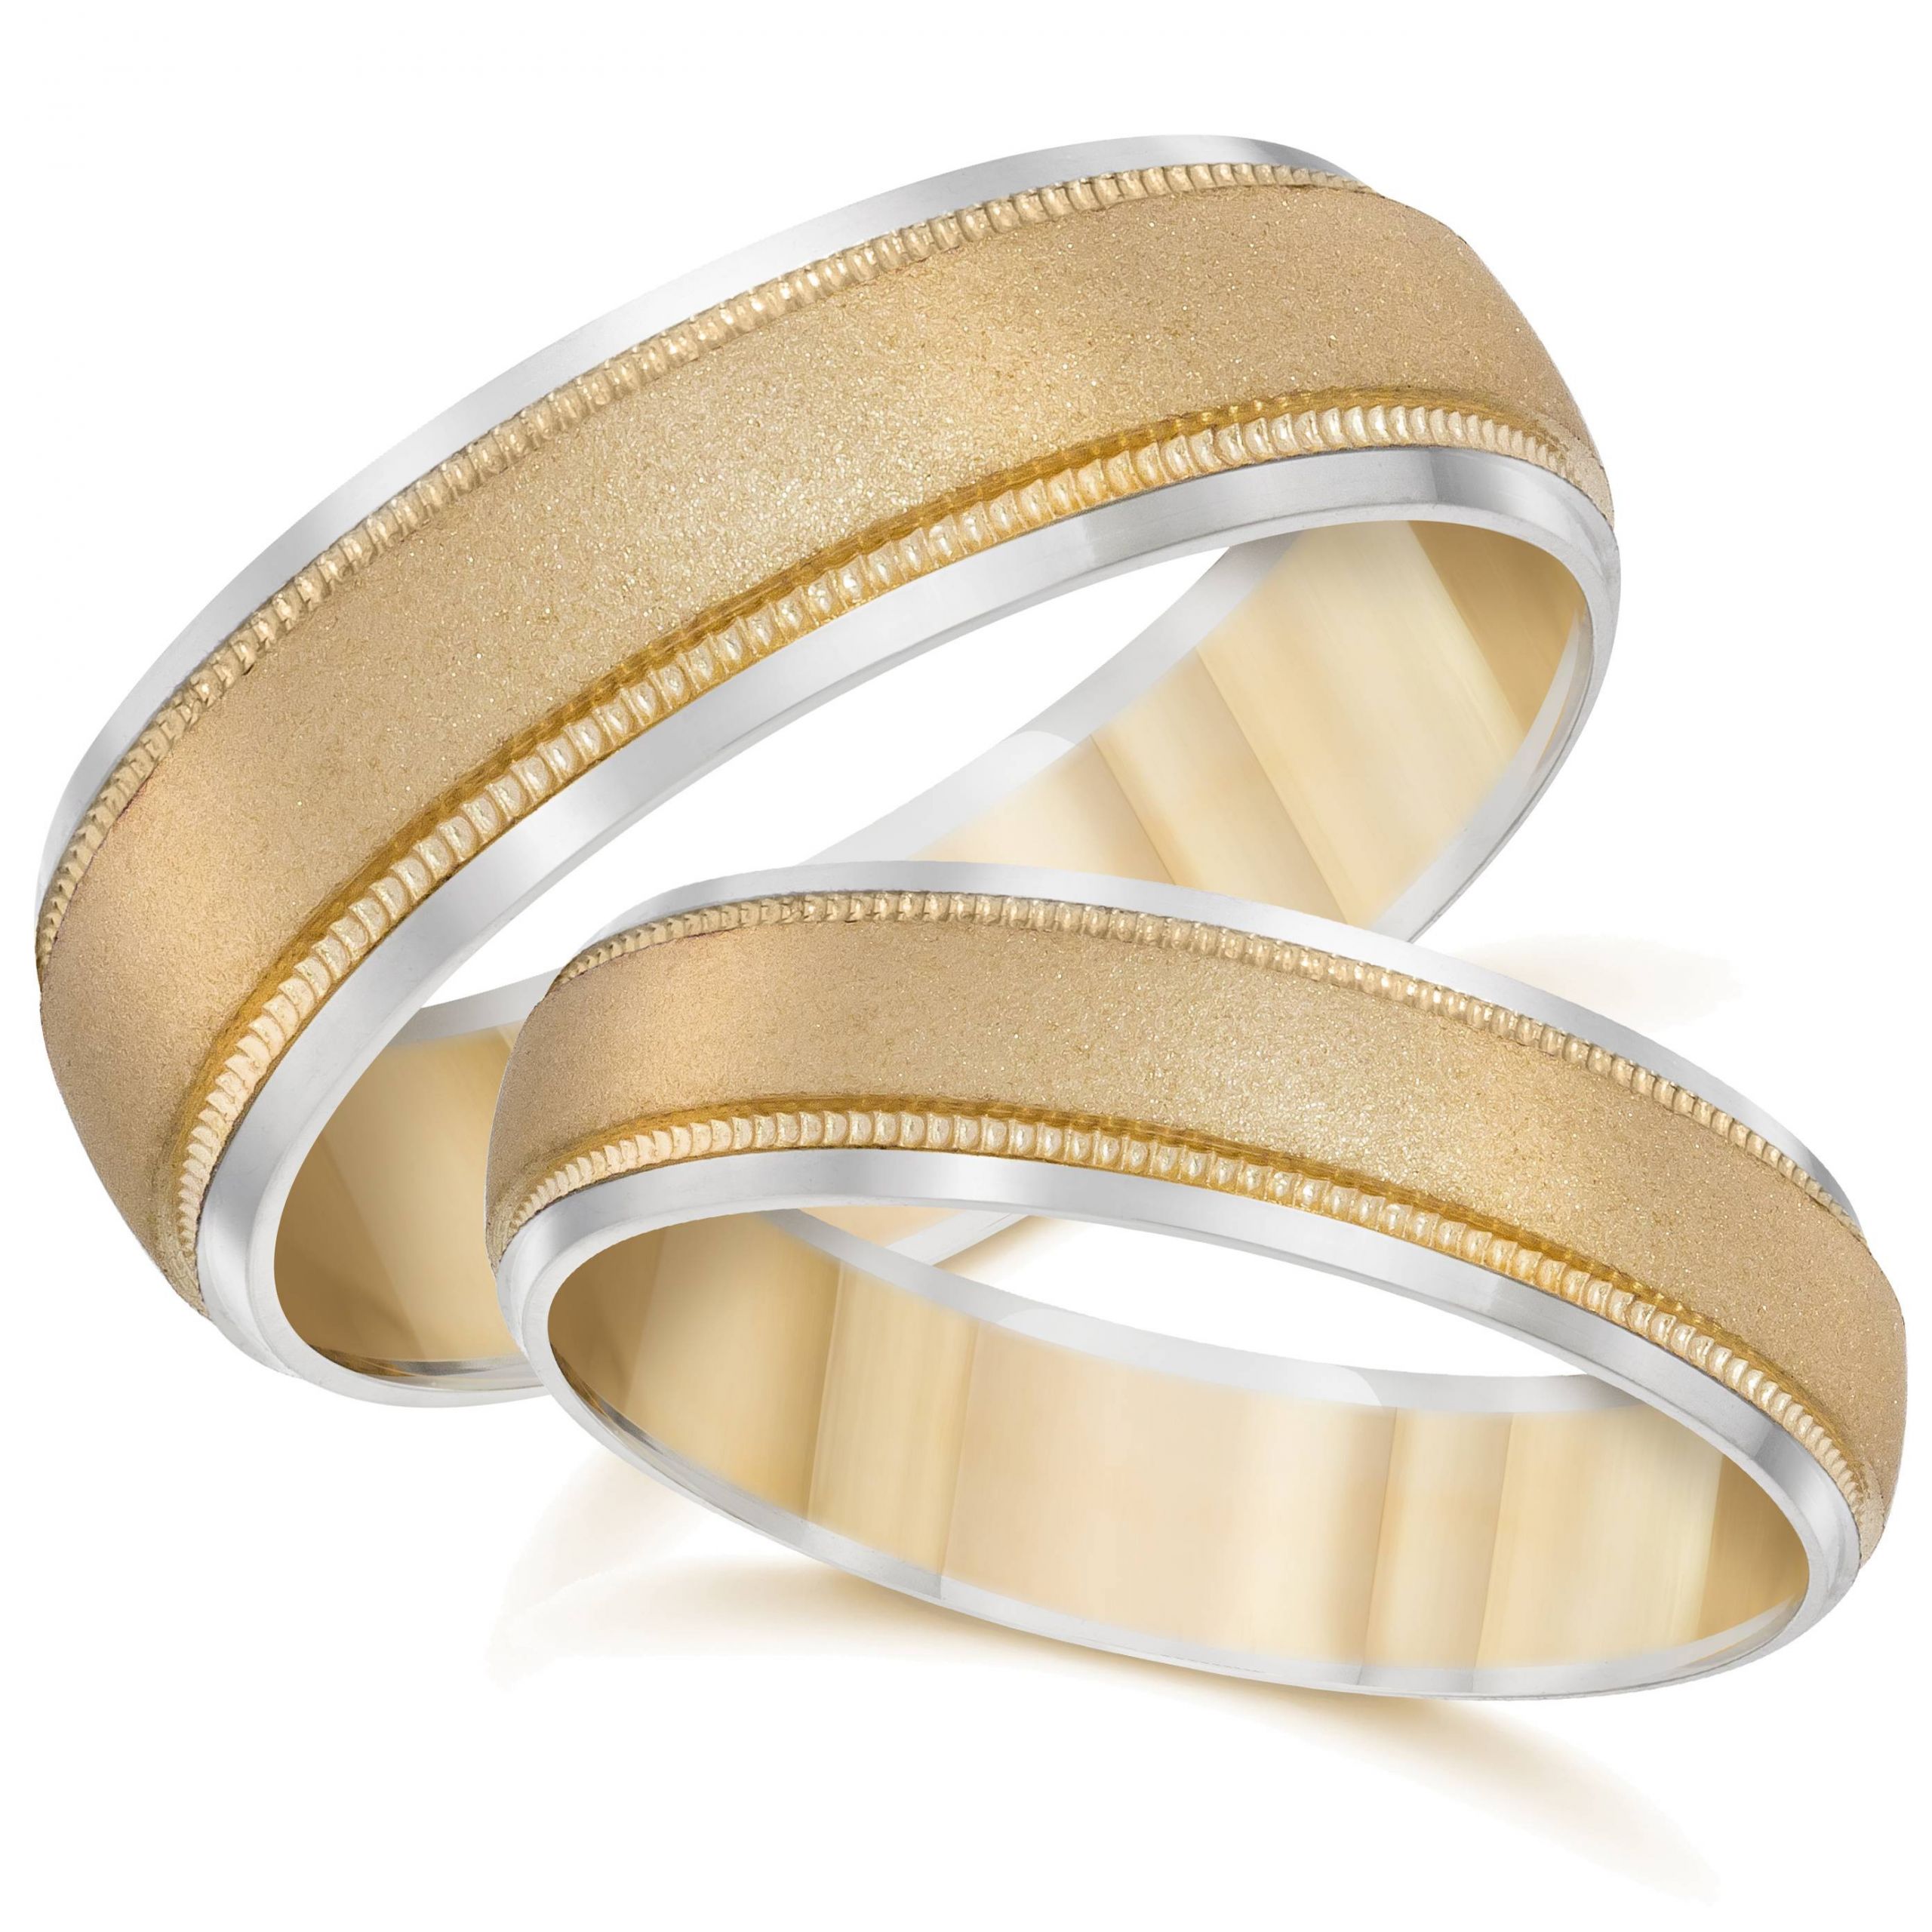 Two Tone Wedding Rings
 Gold Matching His Hers Two Tone Wedding Band Ring Set